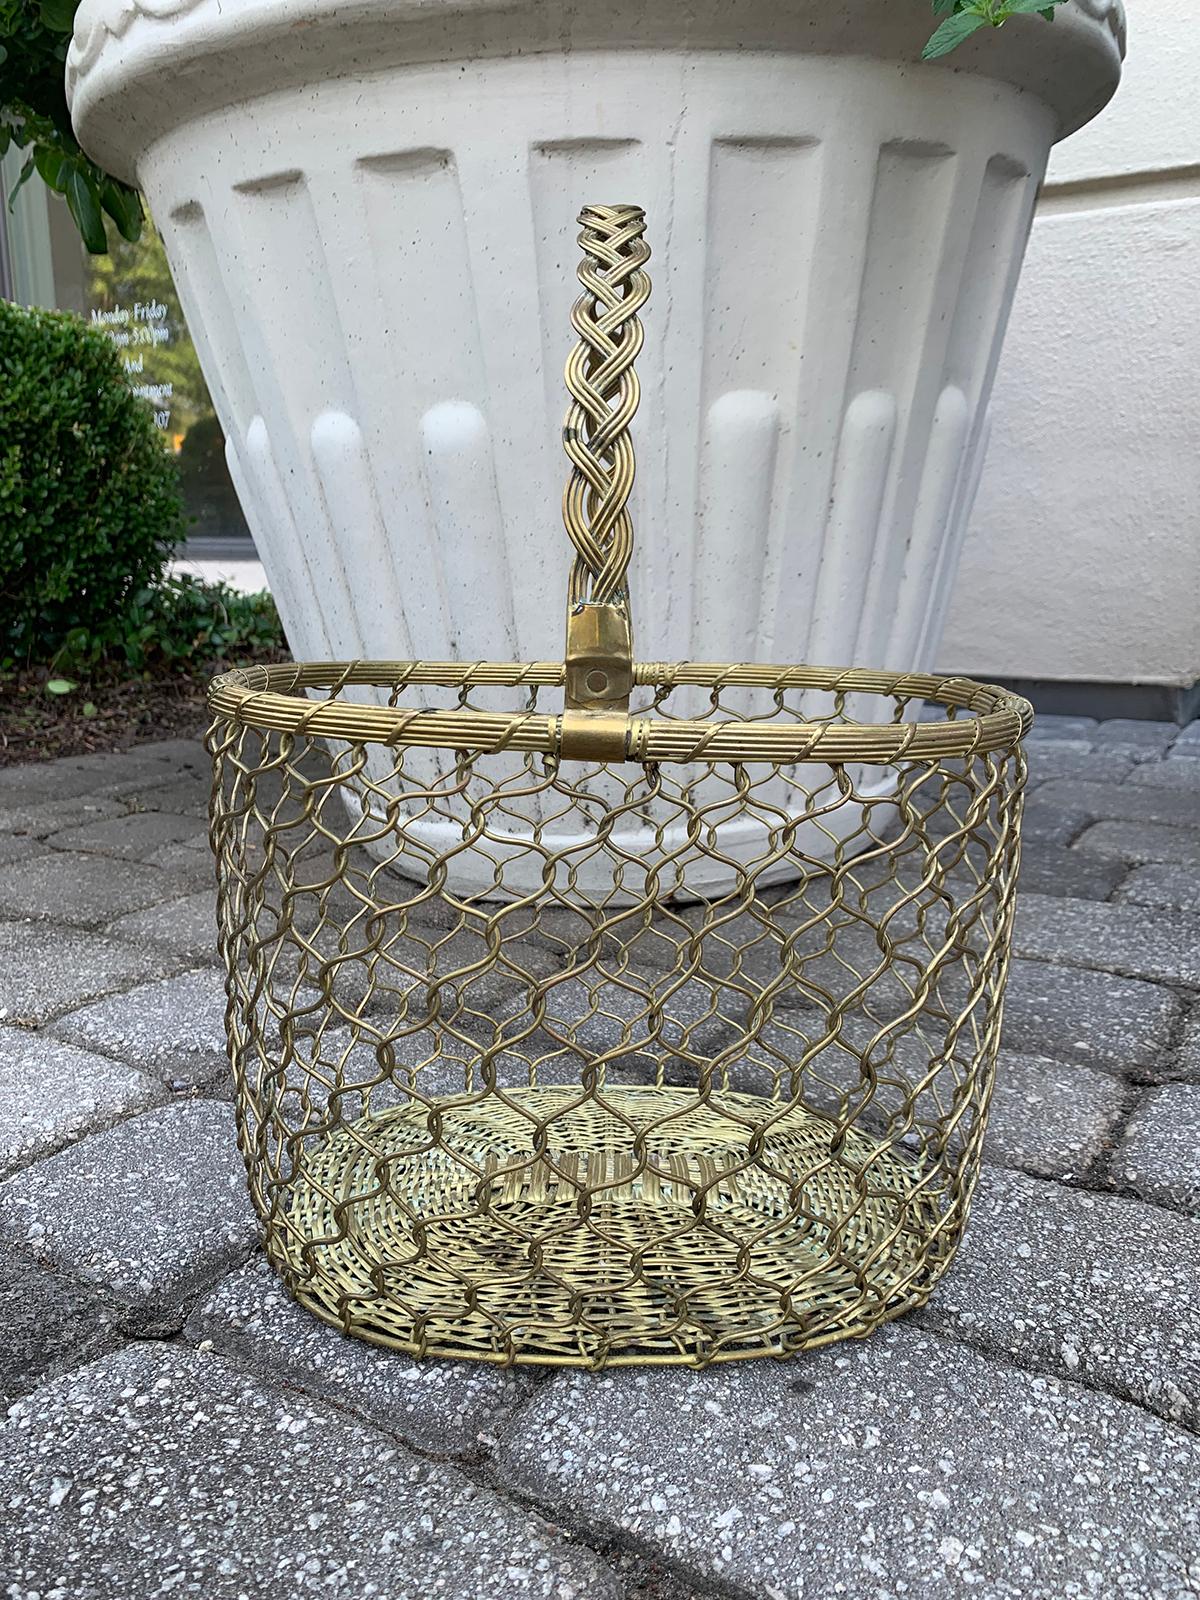 Mid-20th century Italian brass wire basket with handle
Measures: 12